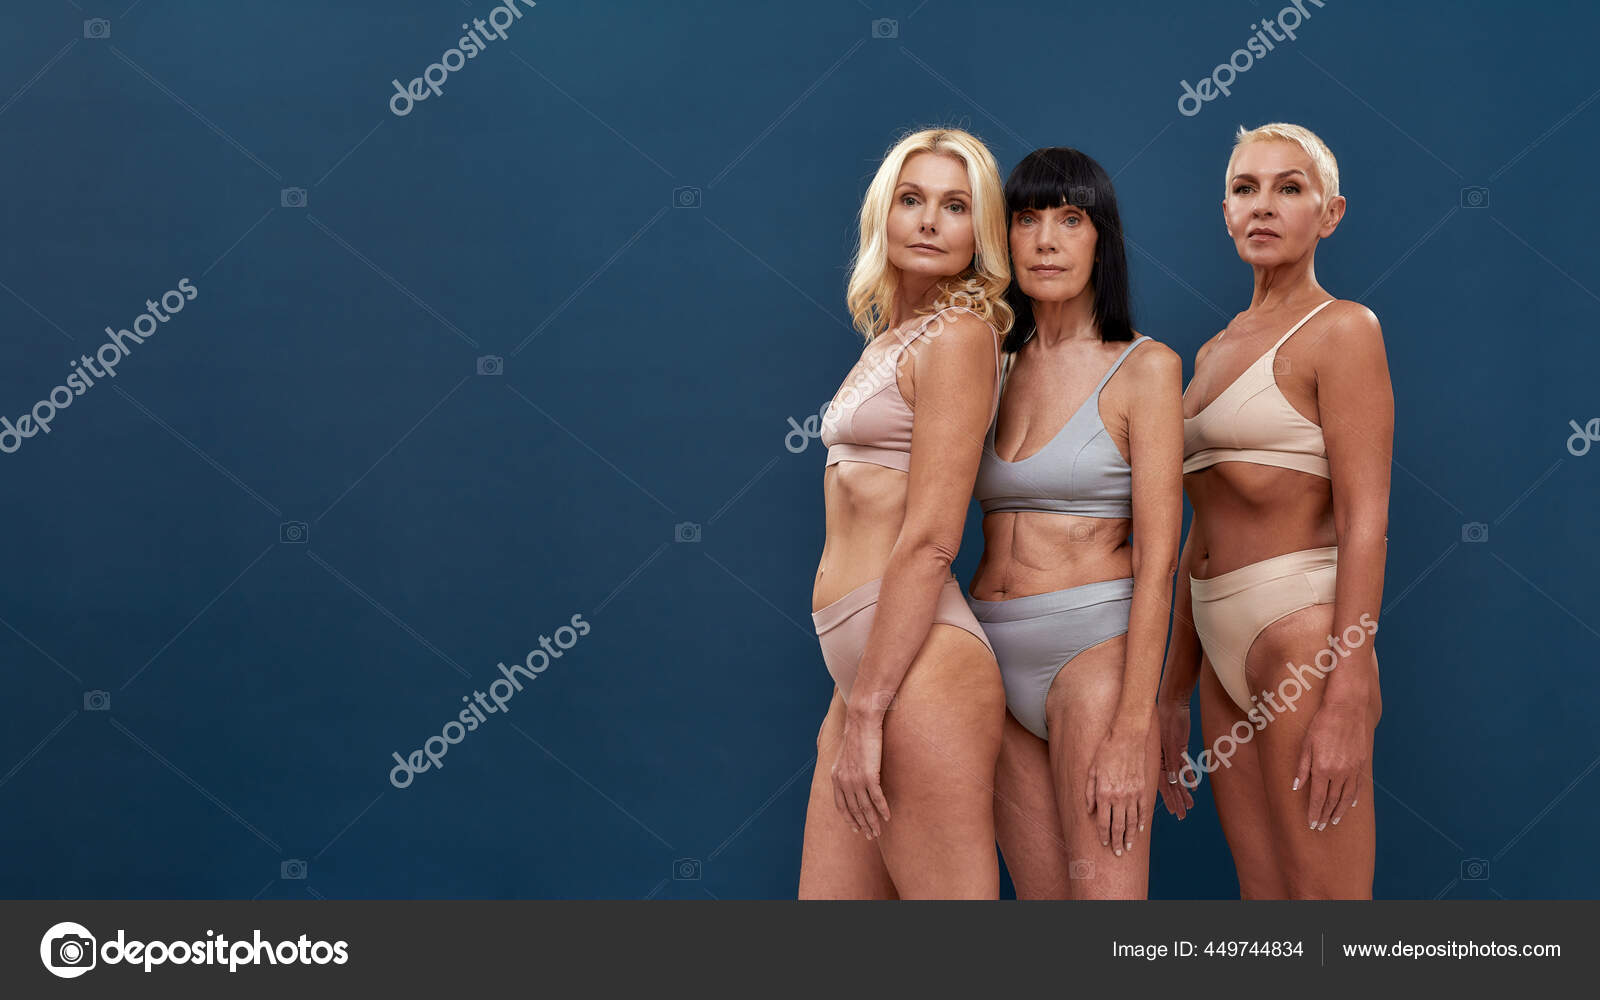 Three caucasian mature women in underwear looking at camera while posing half naked in studio against dark blue background Stock Photo by ©LanaStock 449744834 image